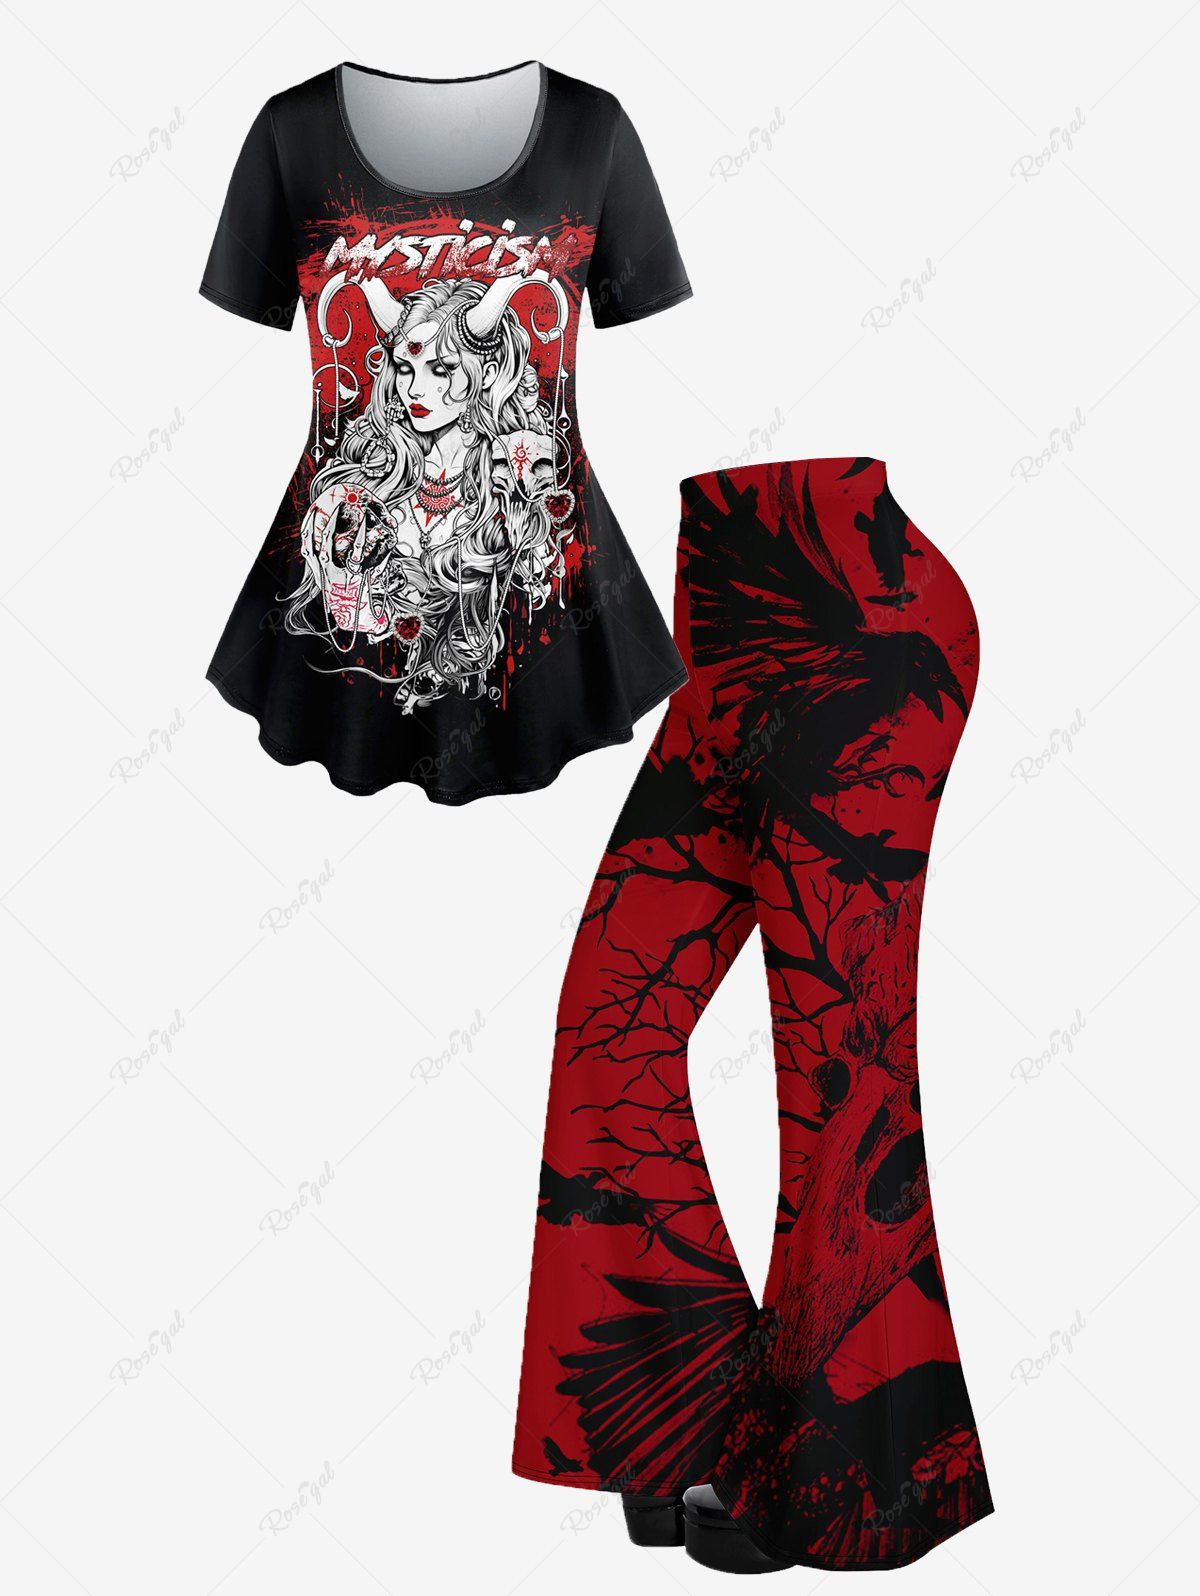 Chic Mysterious Girl Skull Heart Pendant Print T-shirt And Eagle Branch Print Flare Pants Gothic Outfit  